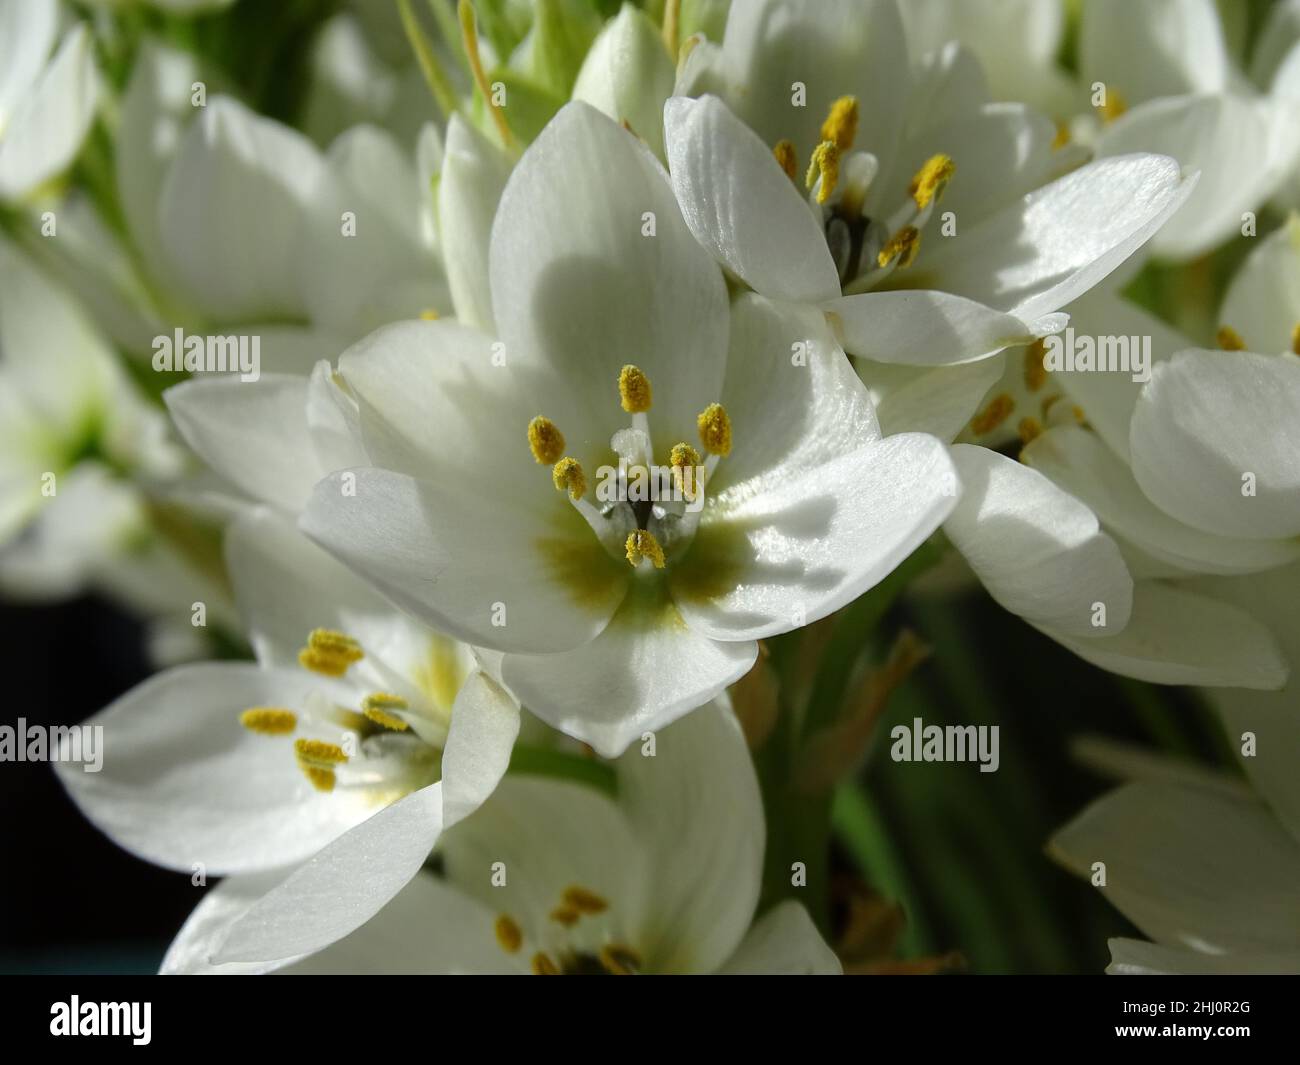 close up of the white flowers of the Ornithogalum thyrsoides, with sunlight on the petals Stock Photo